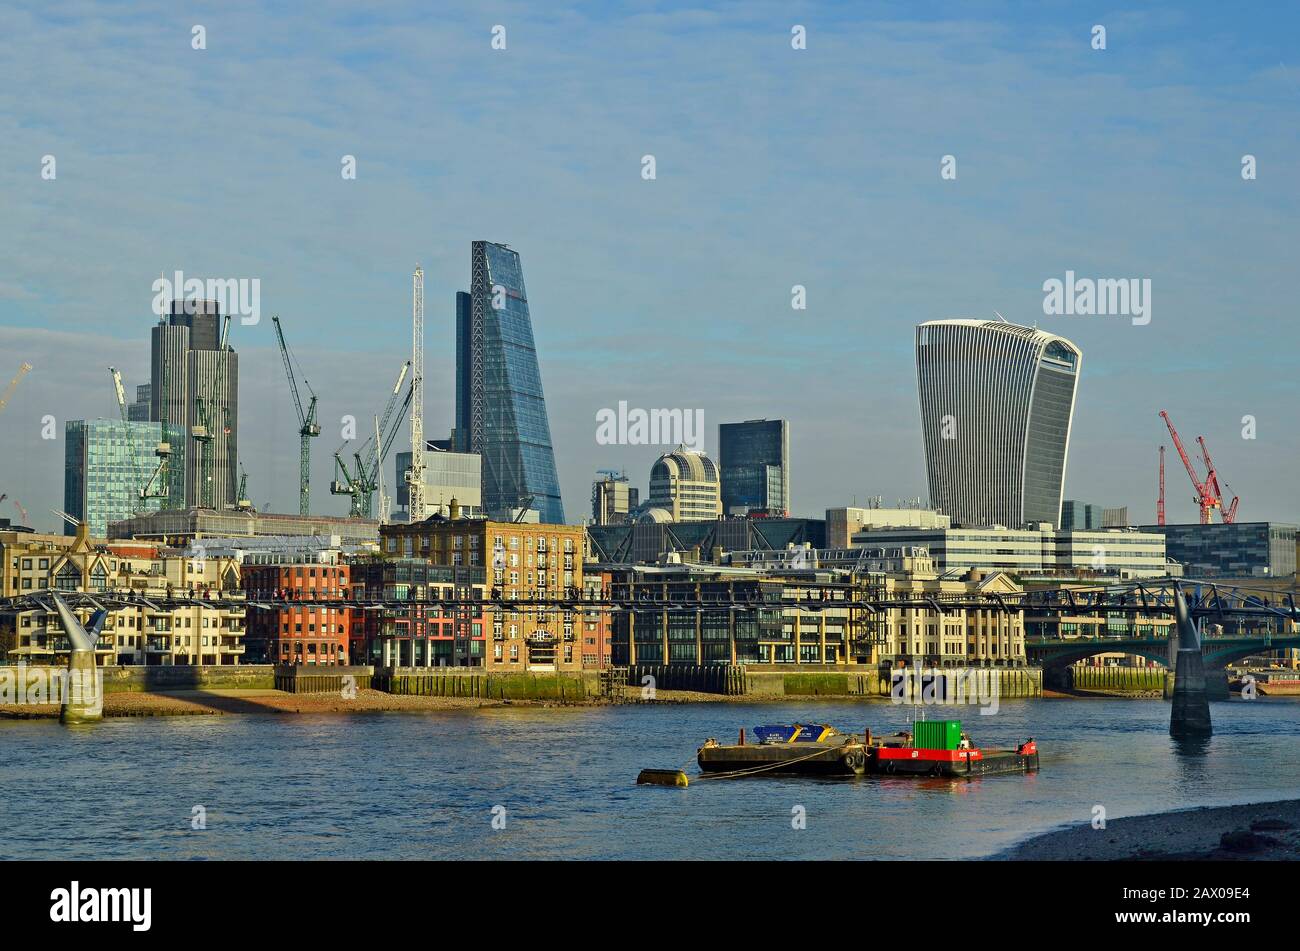 London, UK - January 19th 2016: Millenniums bridge and sky srapers, B42 tower, Cheese grater and Sky graden building Stock Photo